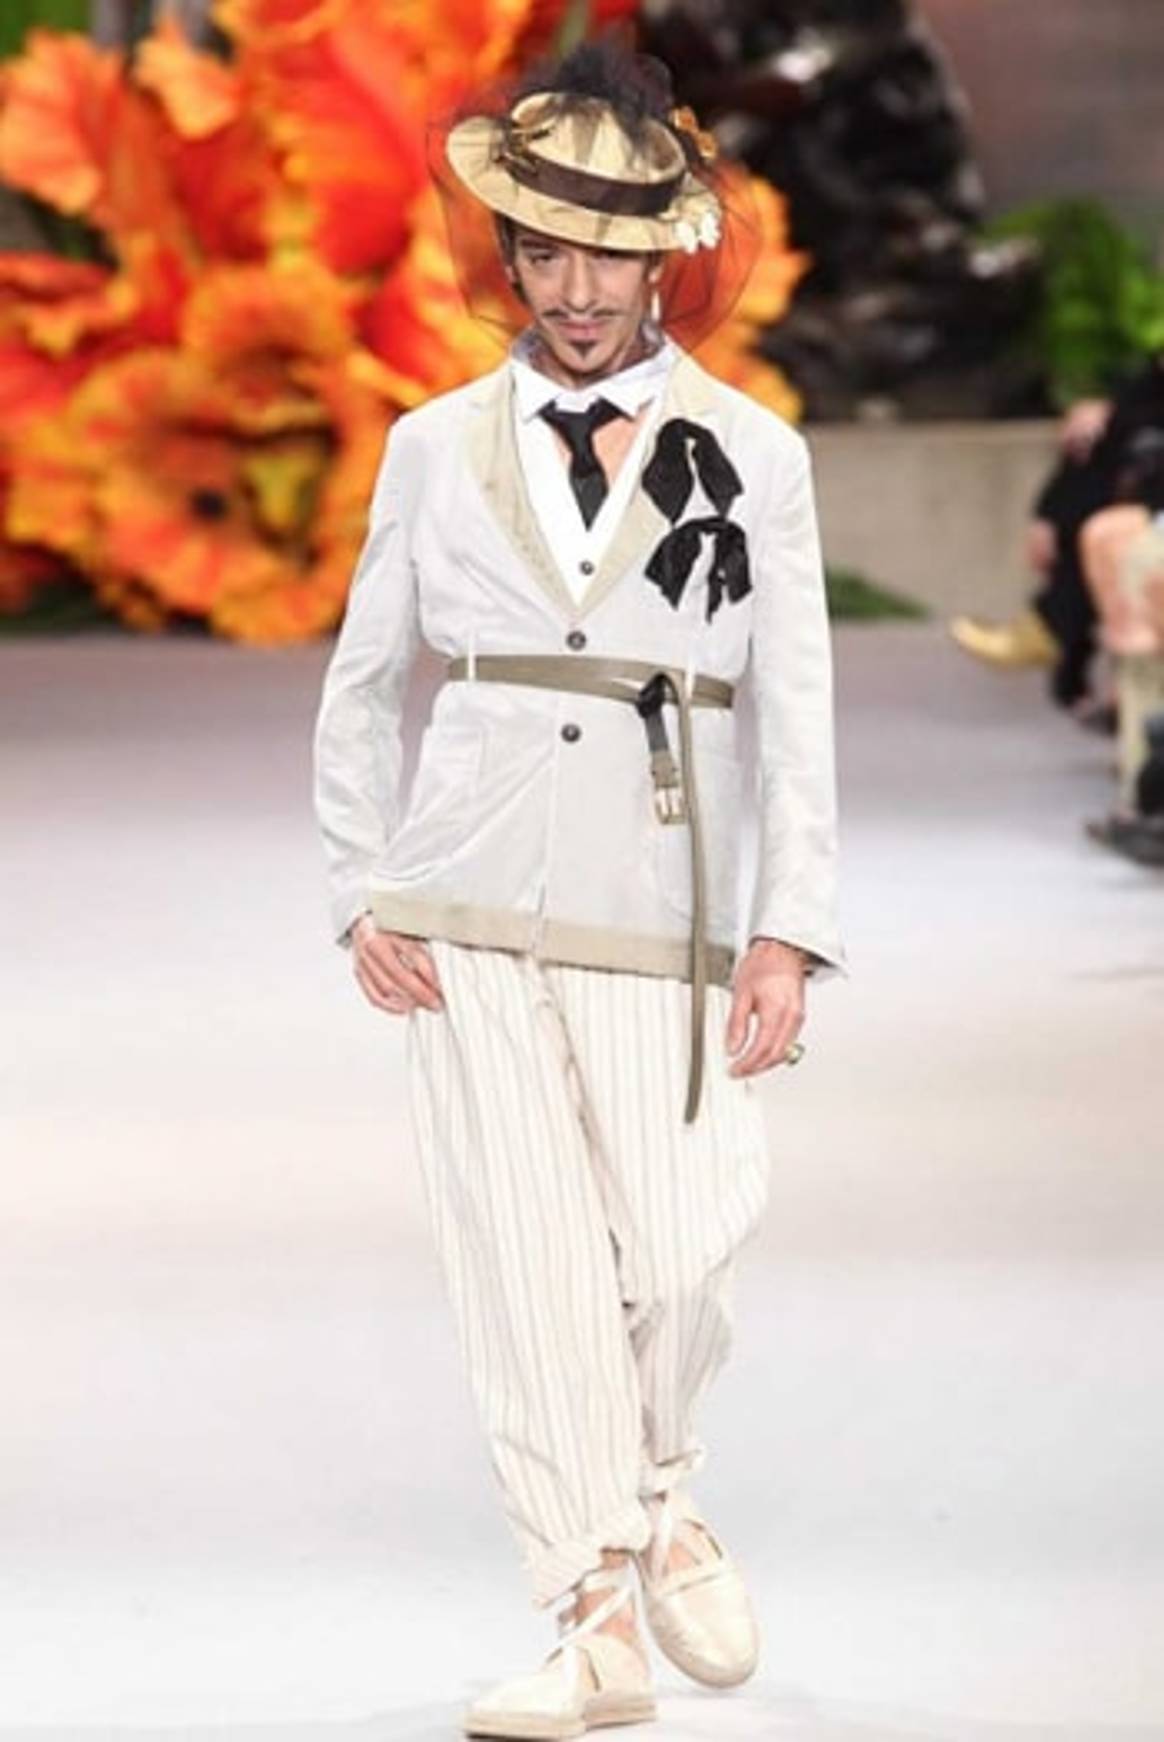 Galliano’s Parsons workshop cancelled